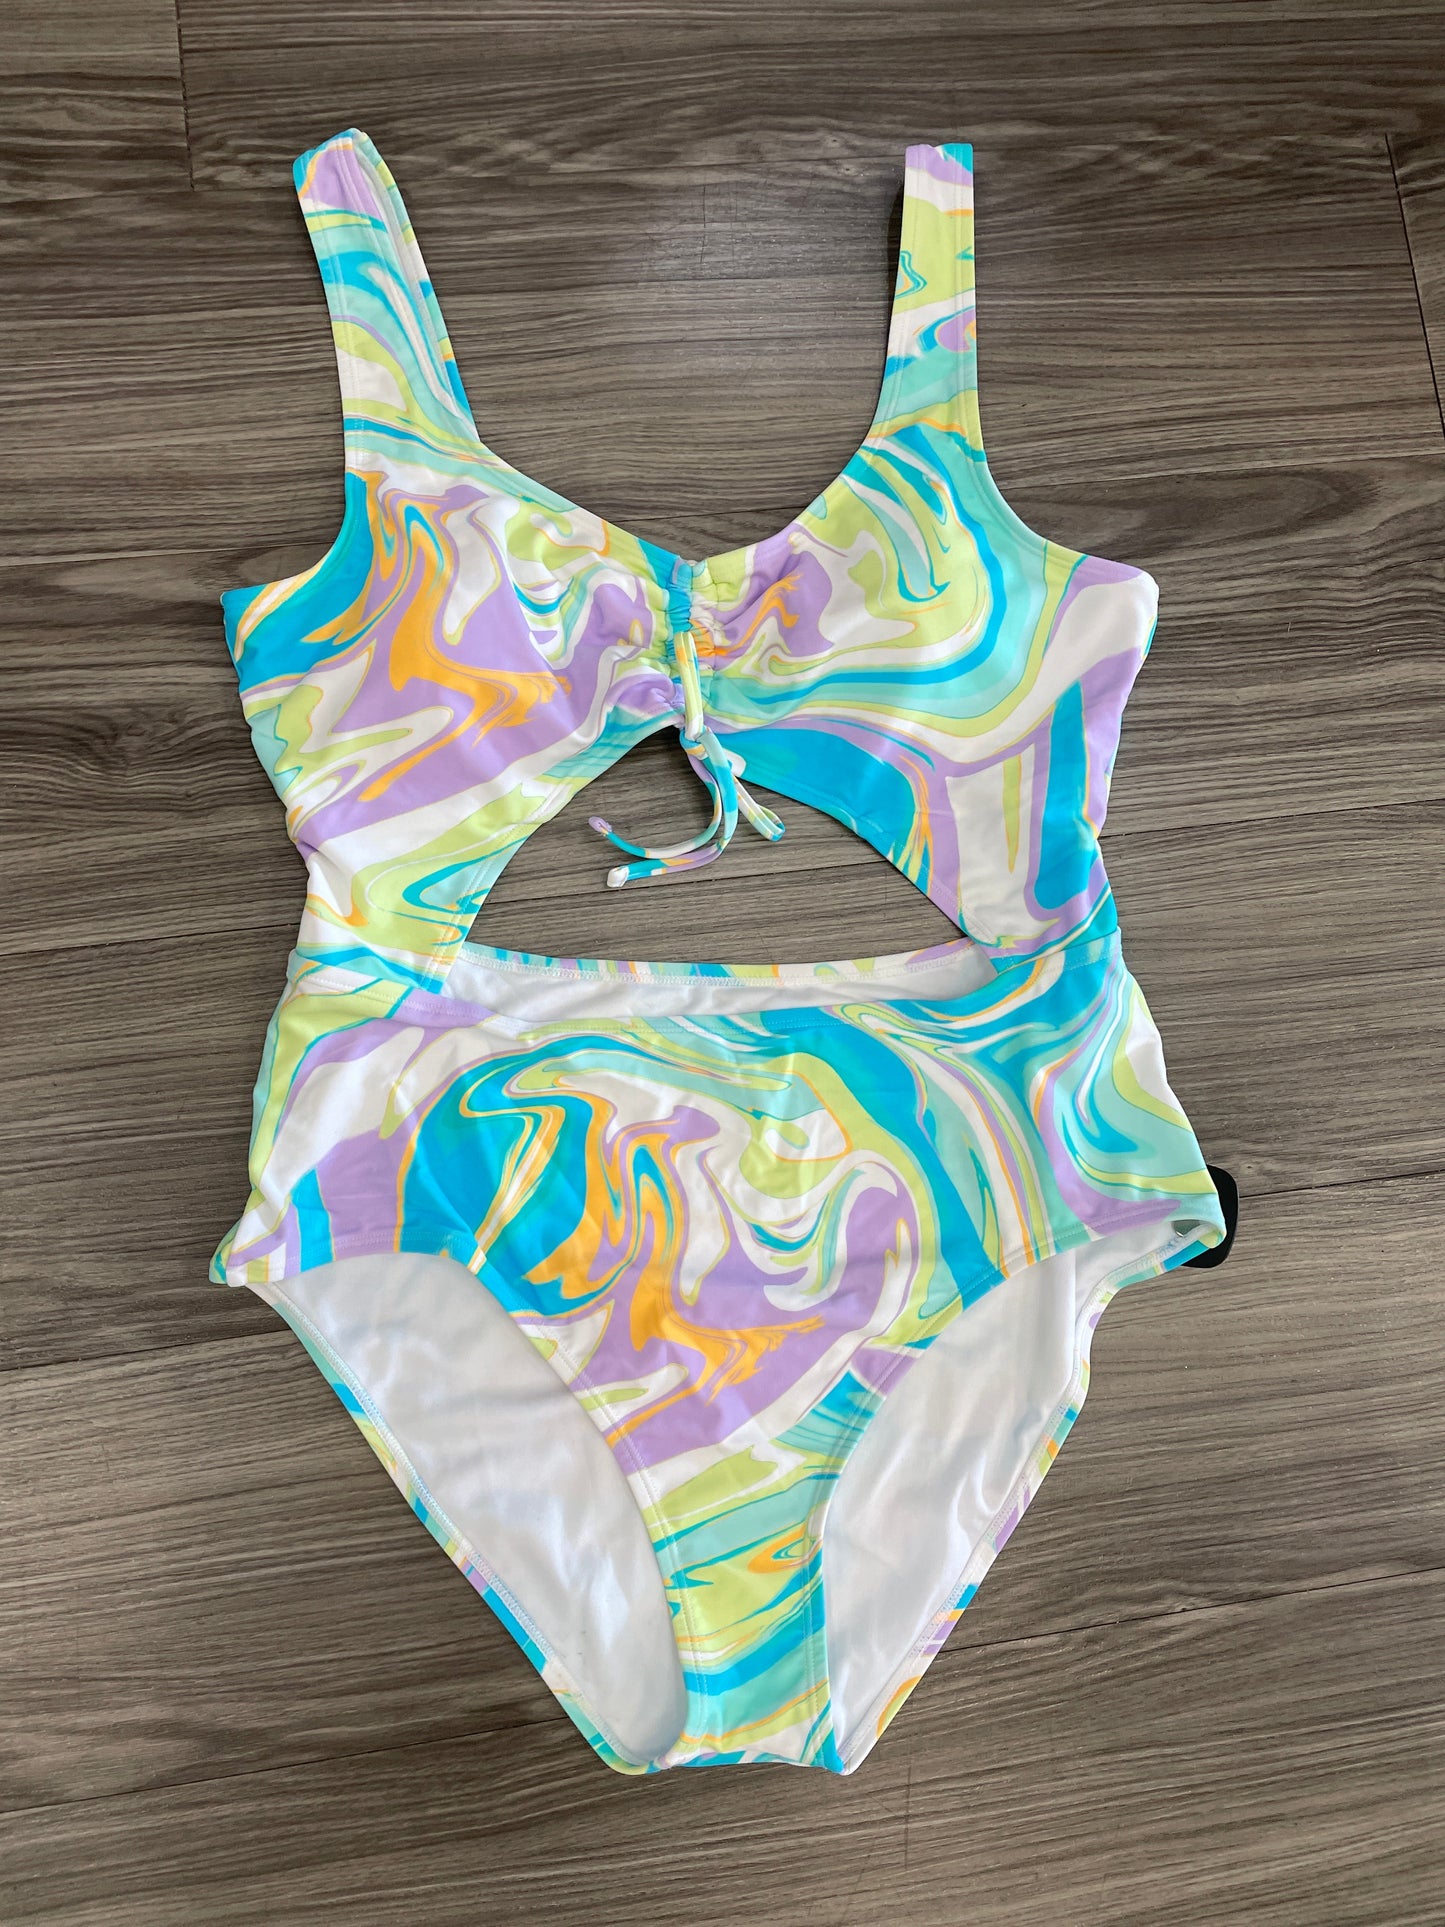 Multi-colored Swimsuit Clothes Mentor, Size Xl